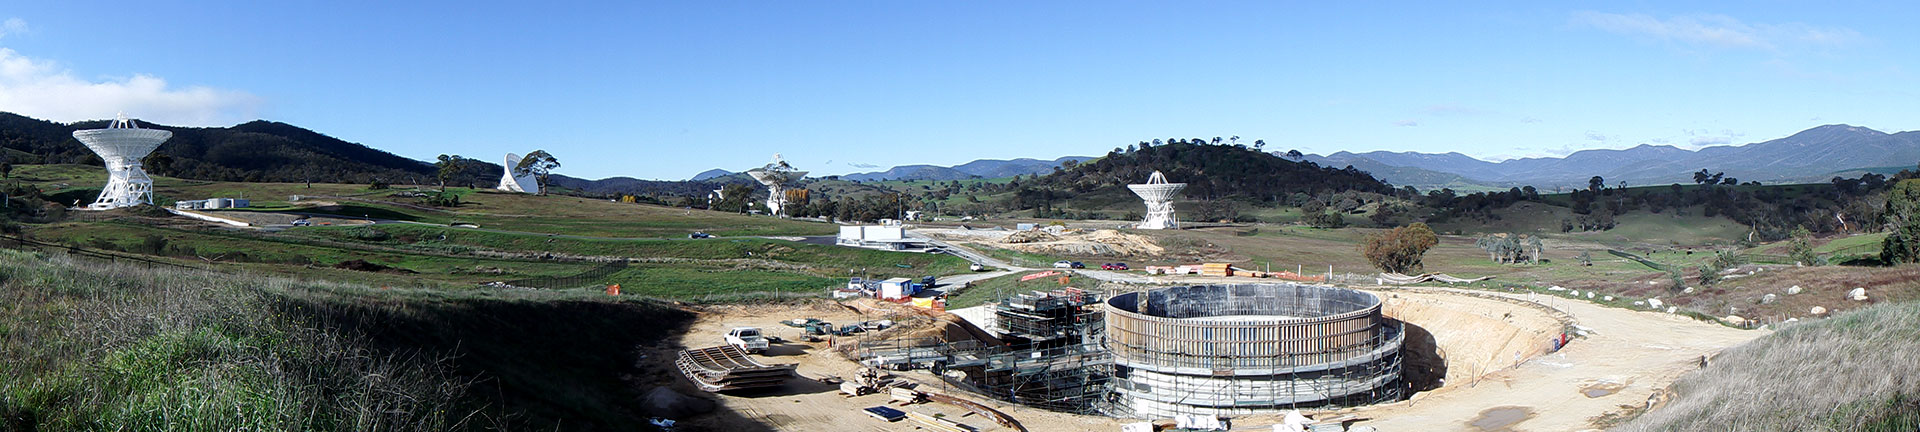 Canberra's space garden. DSS36 joins other antennas at the CSIRO managed complex.